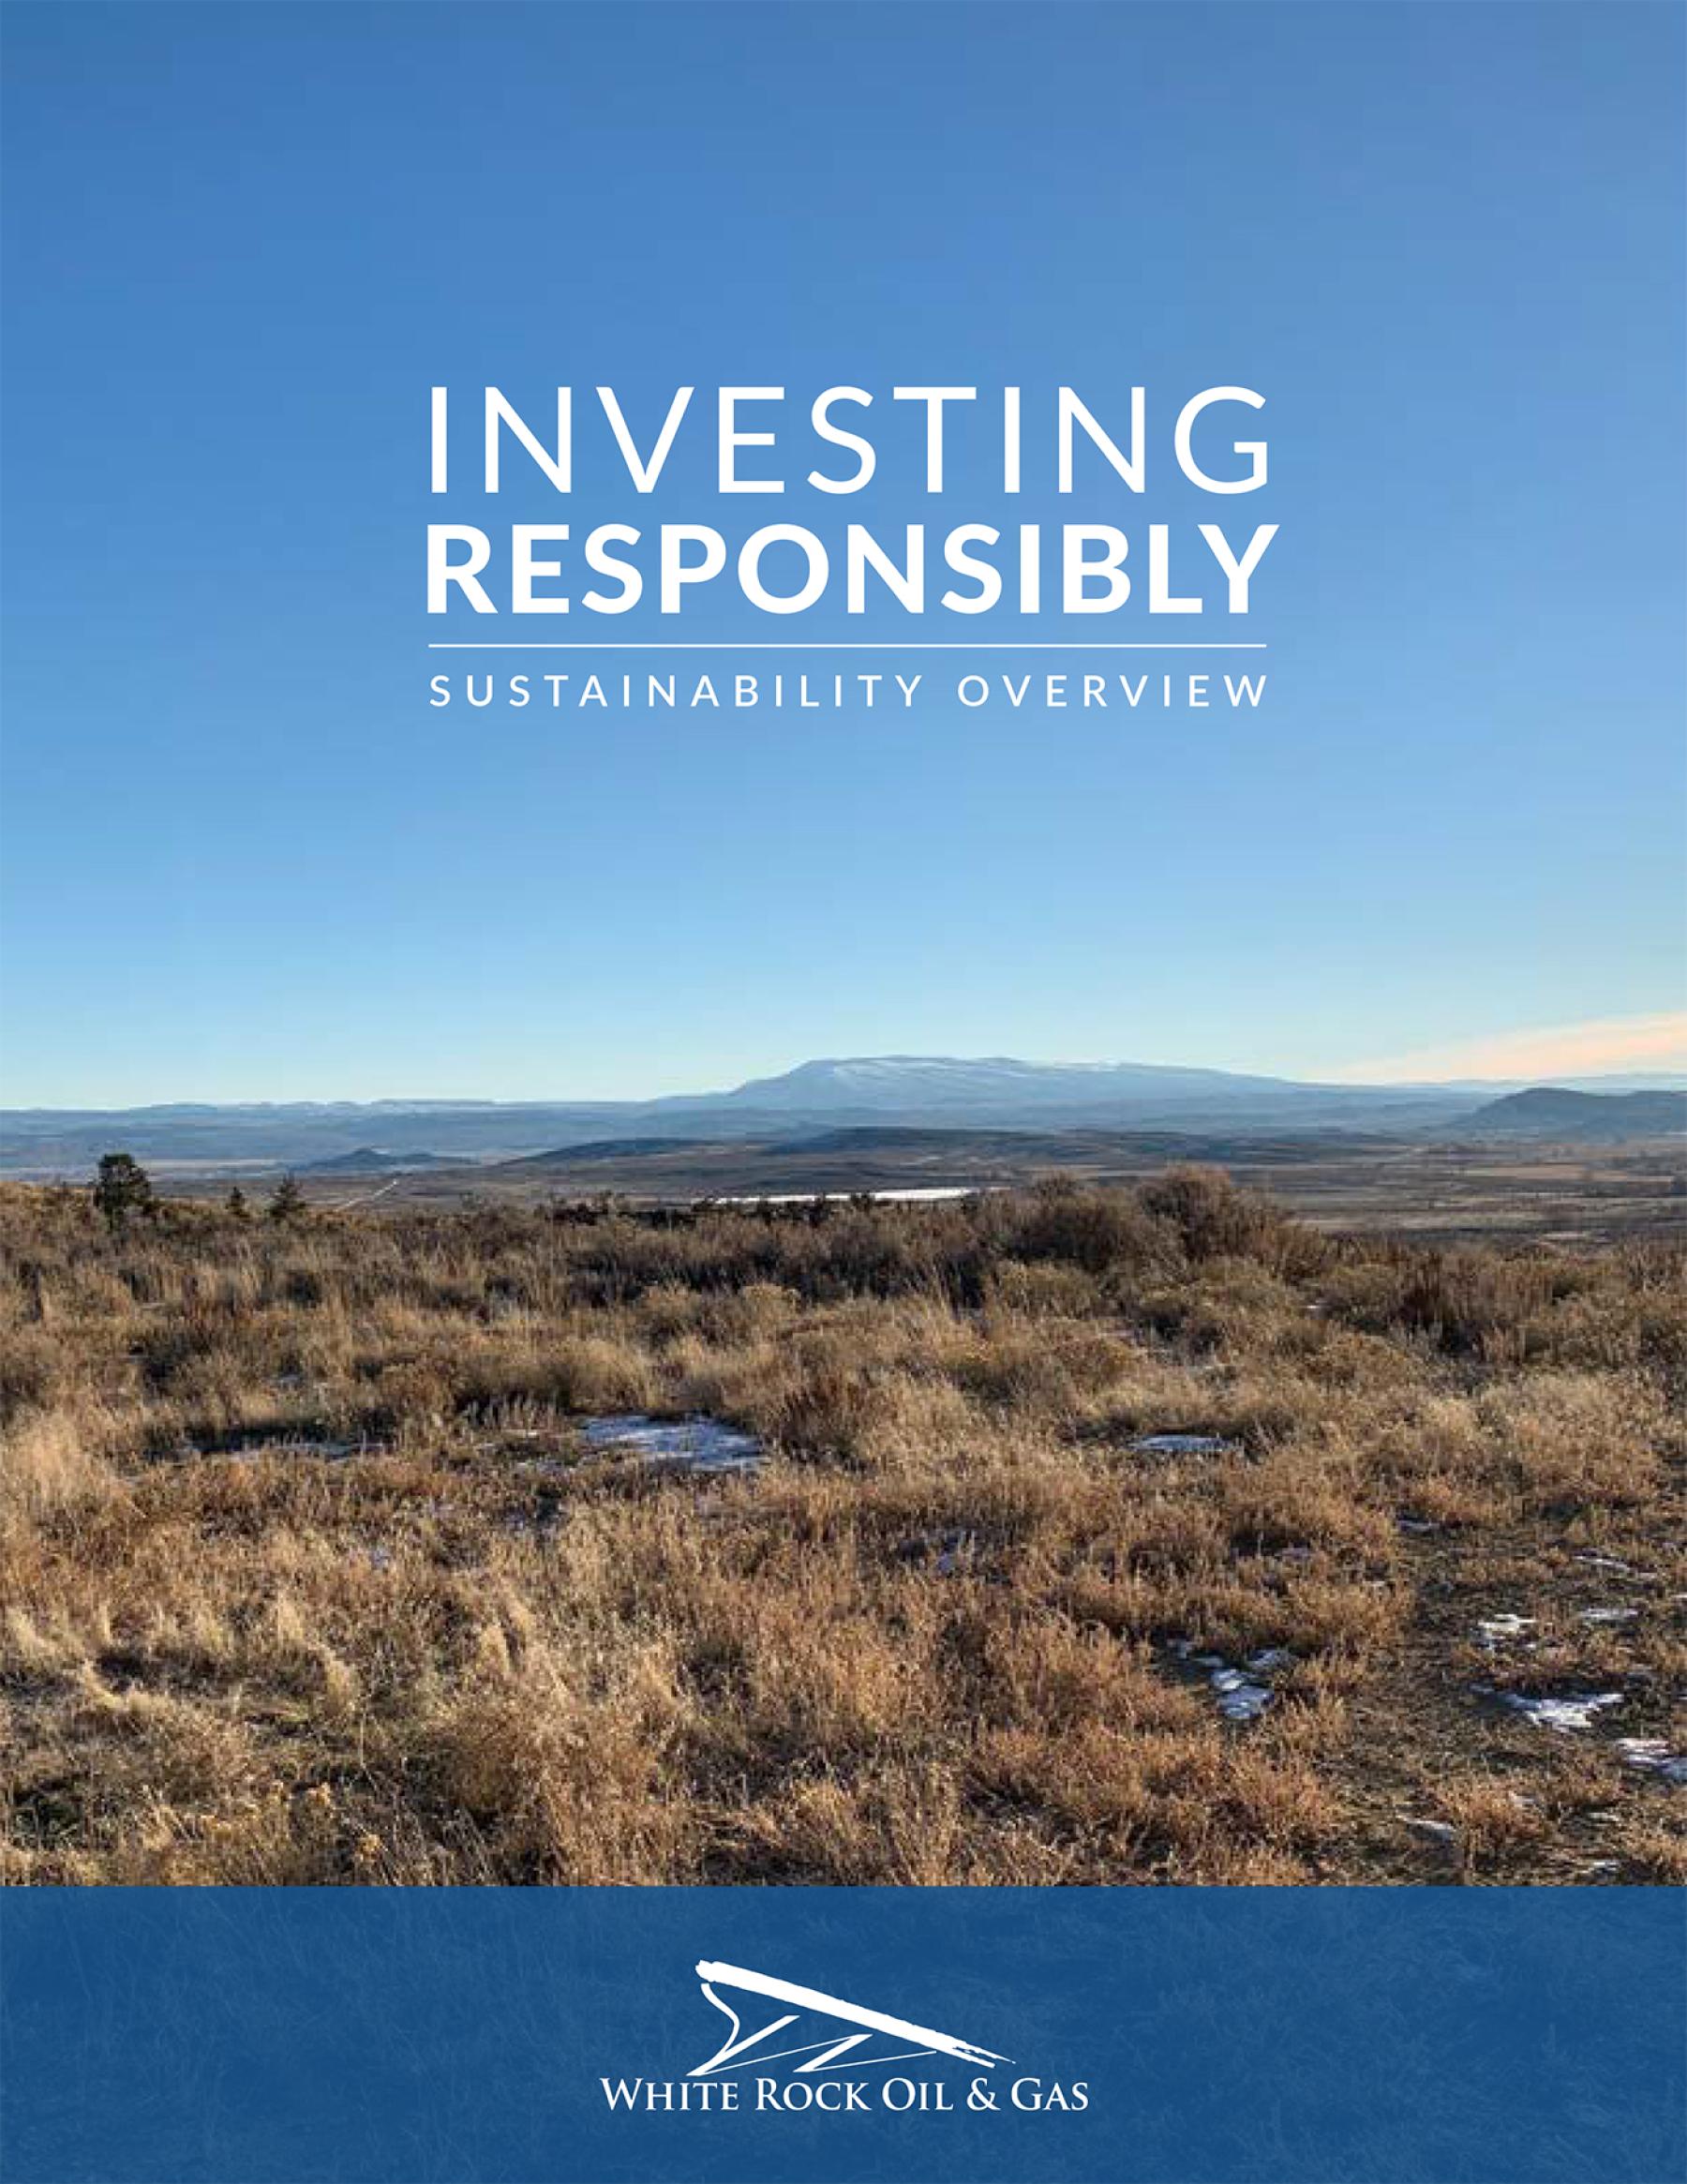 2022 Sustainability Report cover